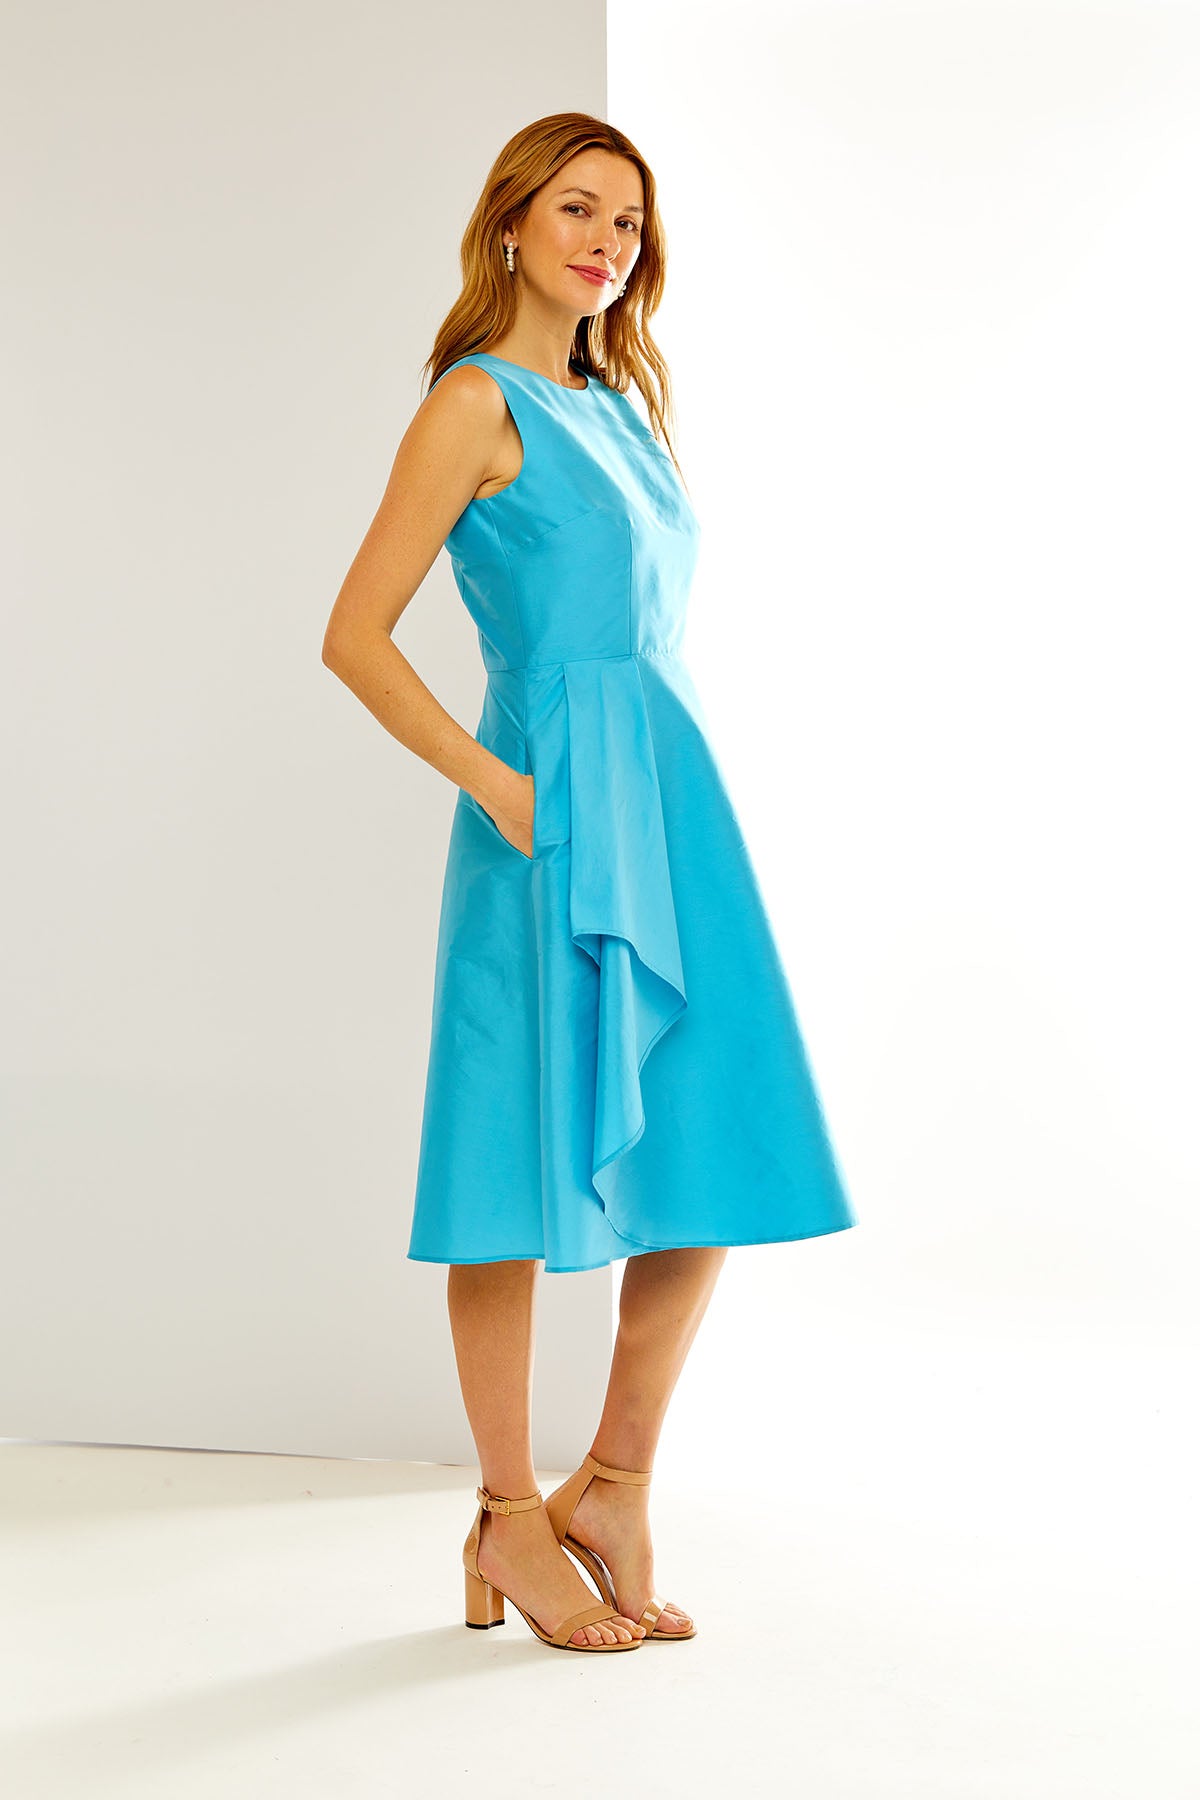 Woman in a turquoise dress